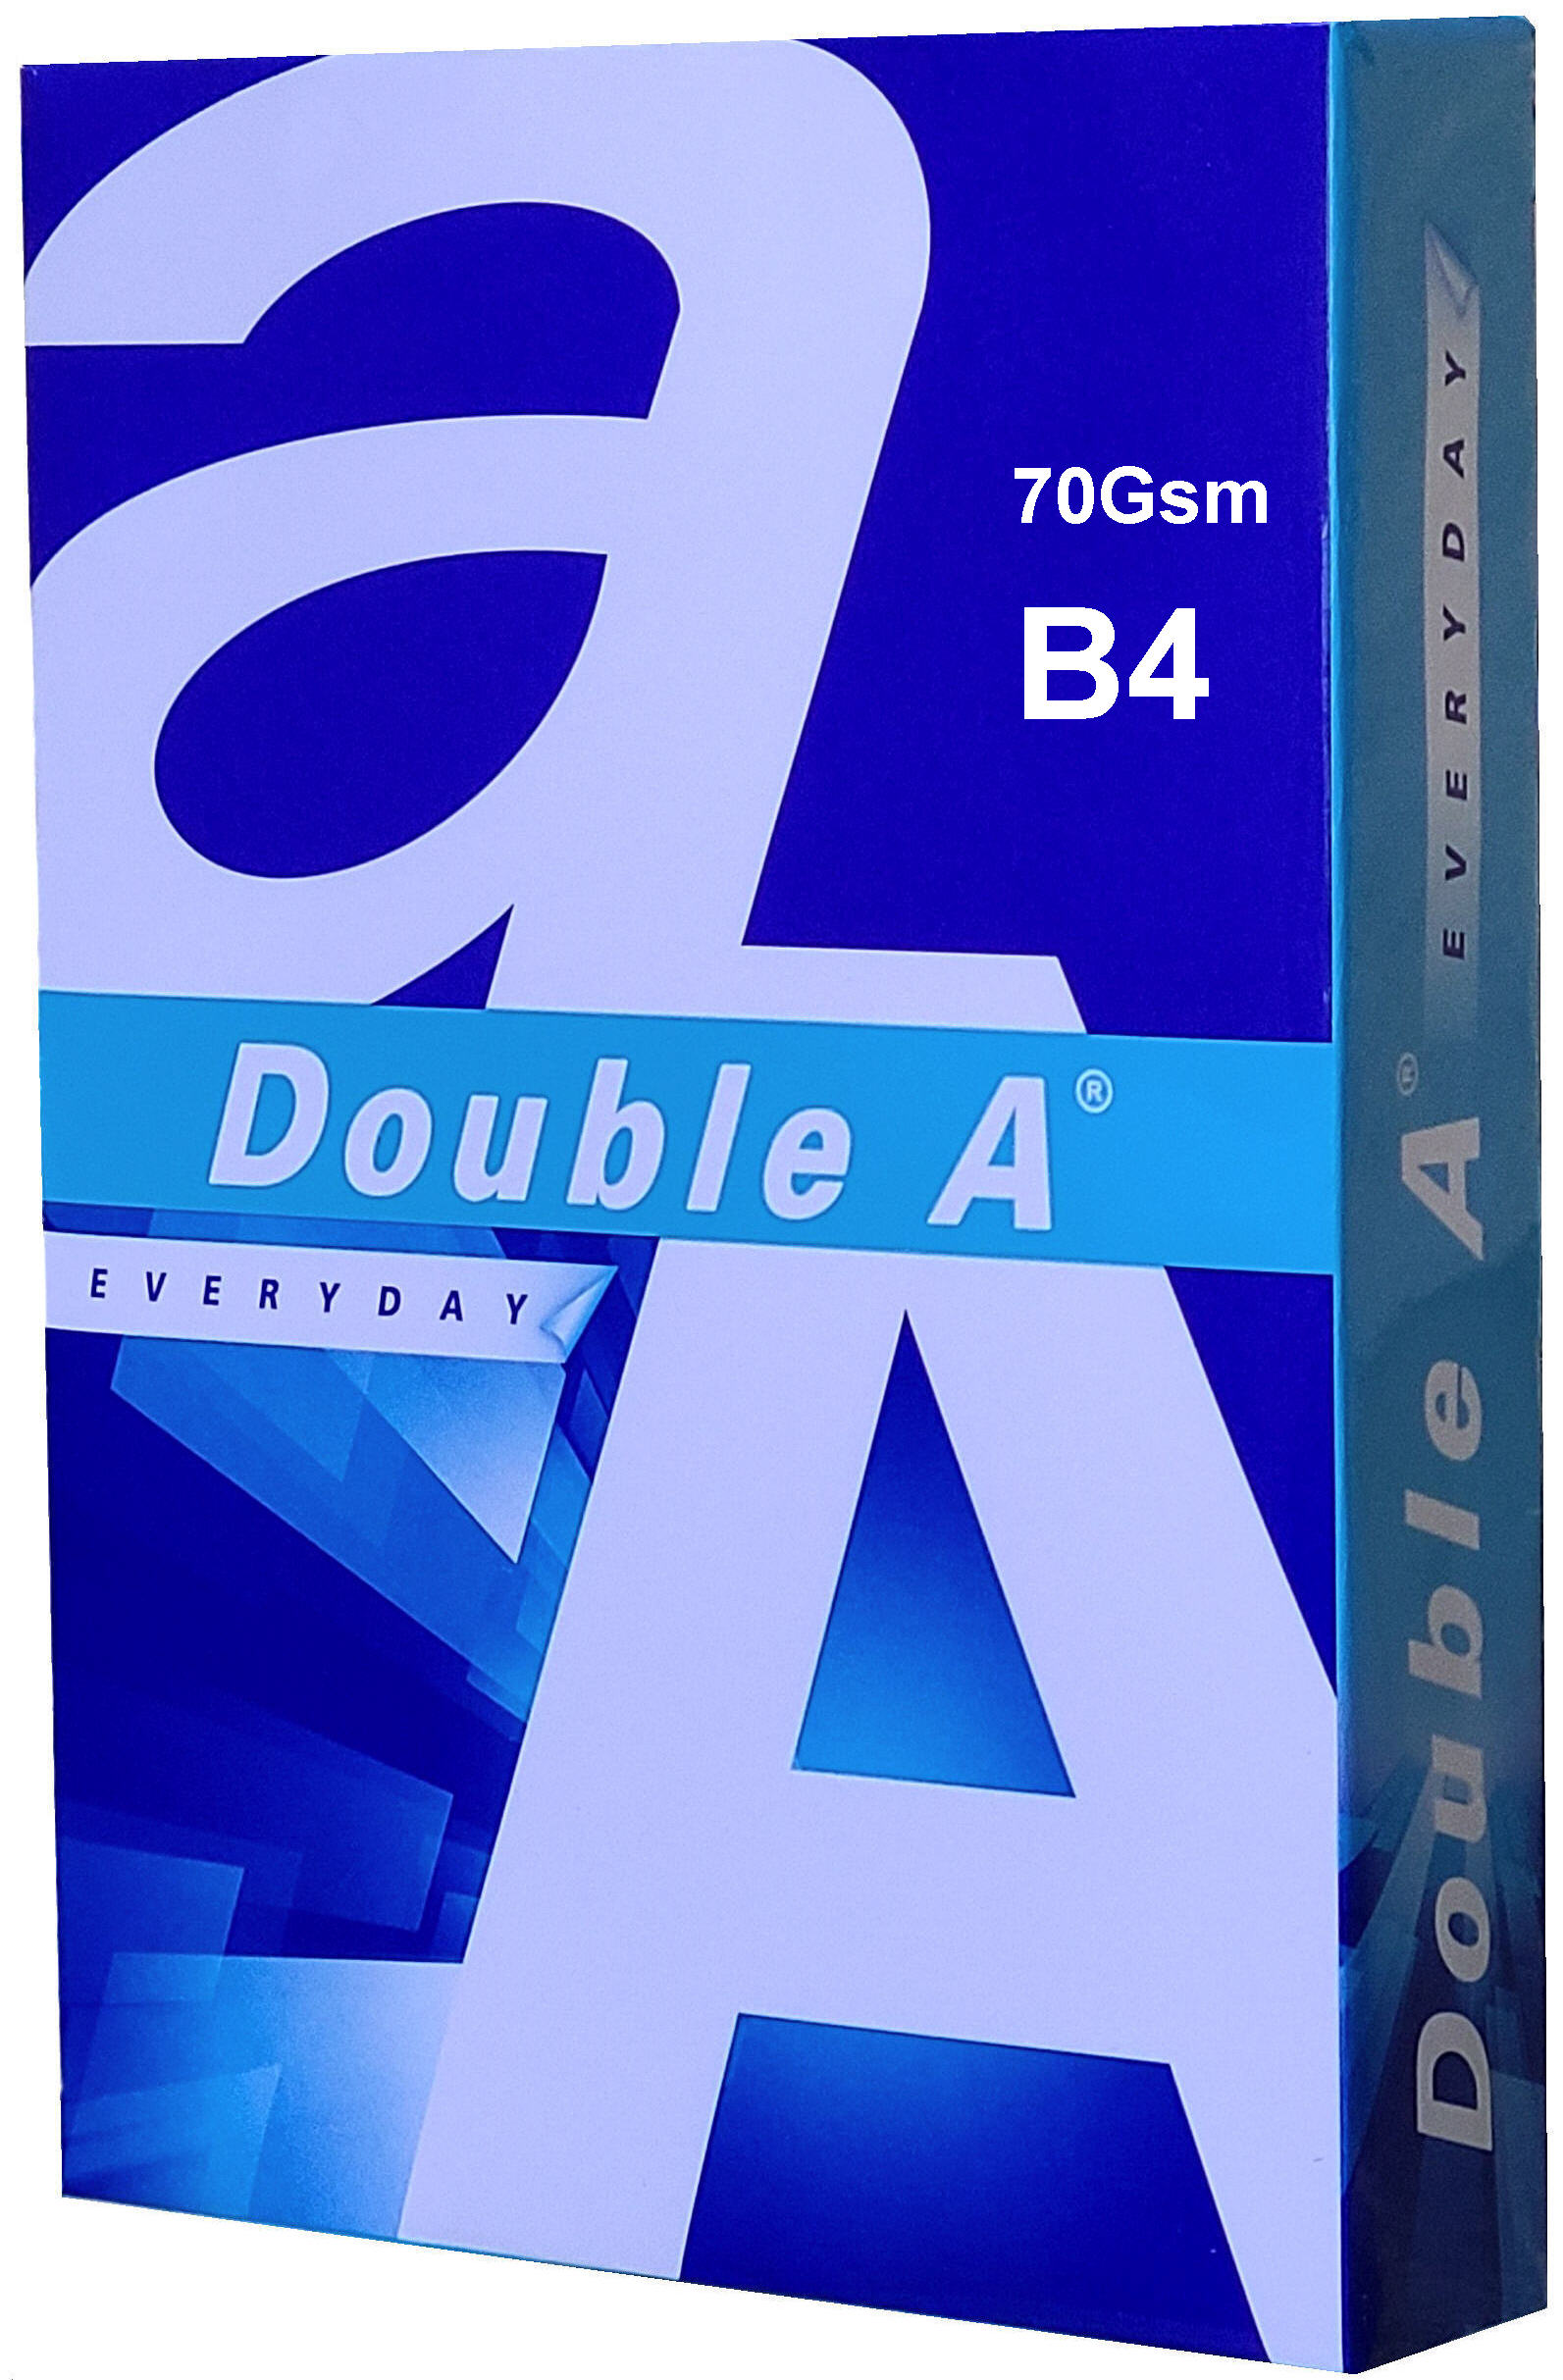 Double A 70Gsm B4